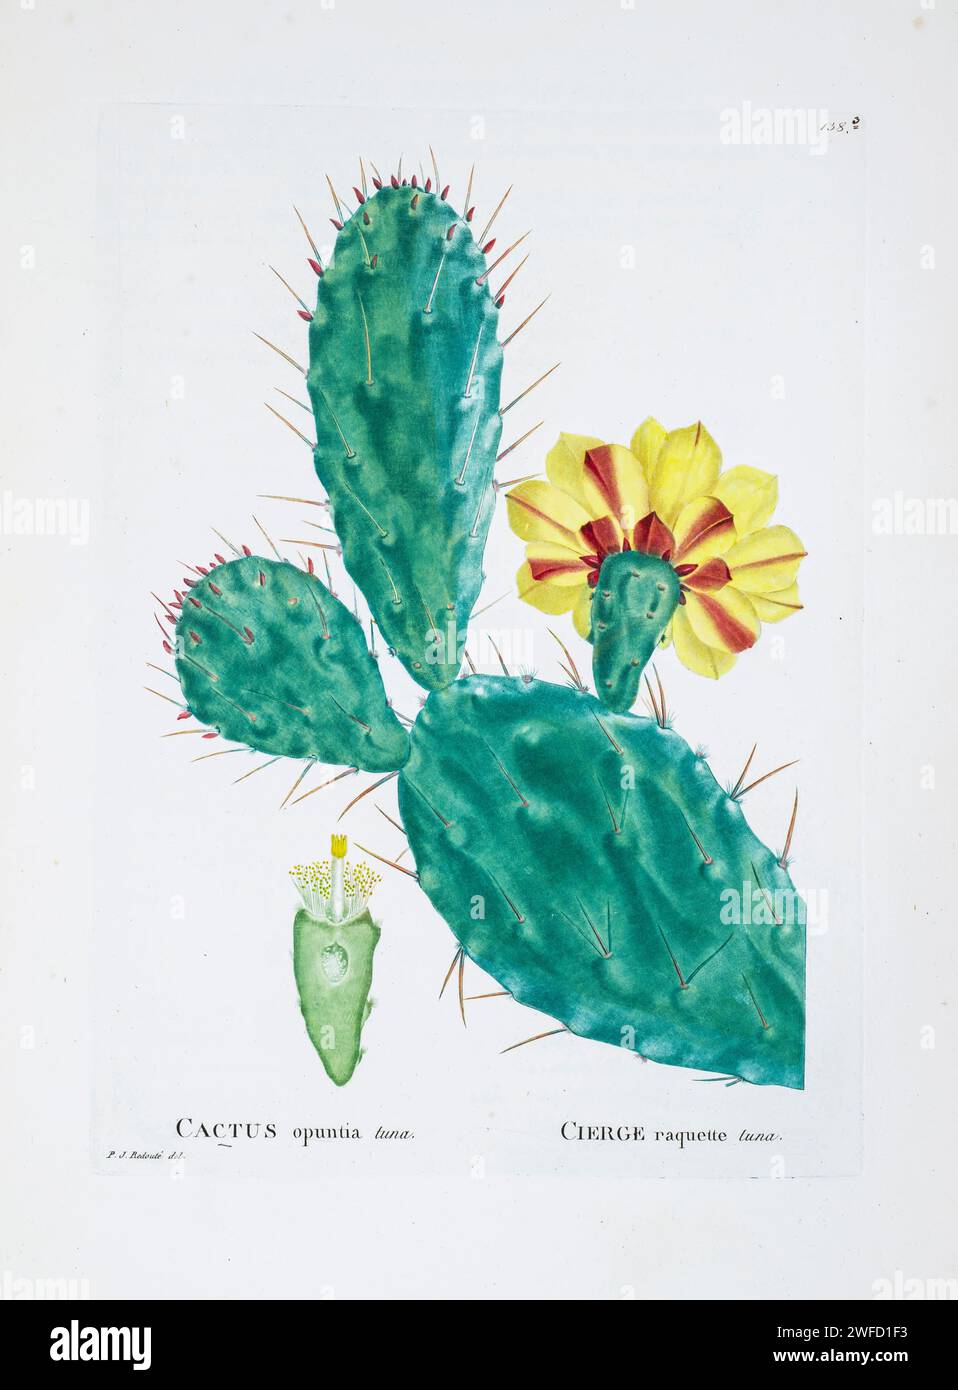 Opuntia vulgaris Mill. Here As Cactus opuntia tuna from History of Succulent Plants [Plantarum historia succulentarum / Histoire des plantes grasses] painted by Pierre-Joseph Redouté and described by Augustin Pyramus de Candolle 1799 Opuntia, commonly called the prickly pear cactus, is a genus of flowering plants in the cactus family Cactaceae, many known for their flavorful fruit and showy flowers. Prickly pear alone is more commonly used to refer exclusively to the fruit Stock Photo